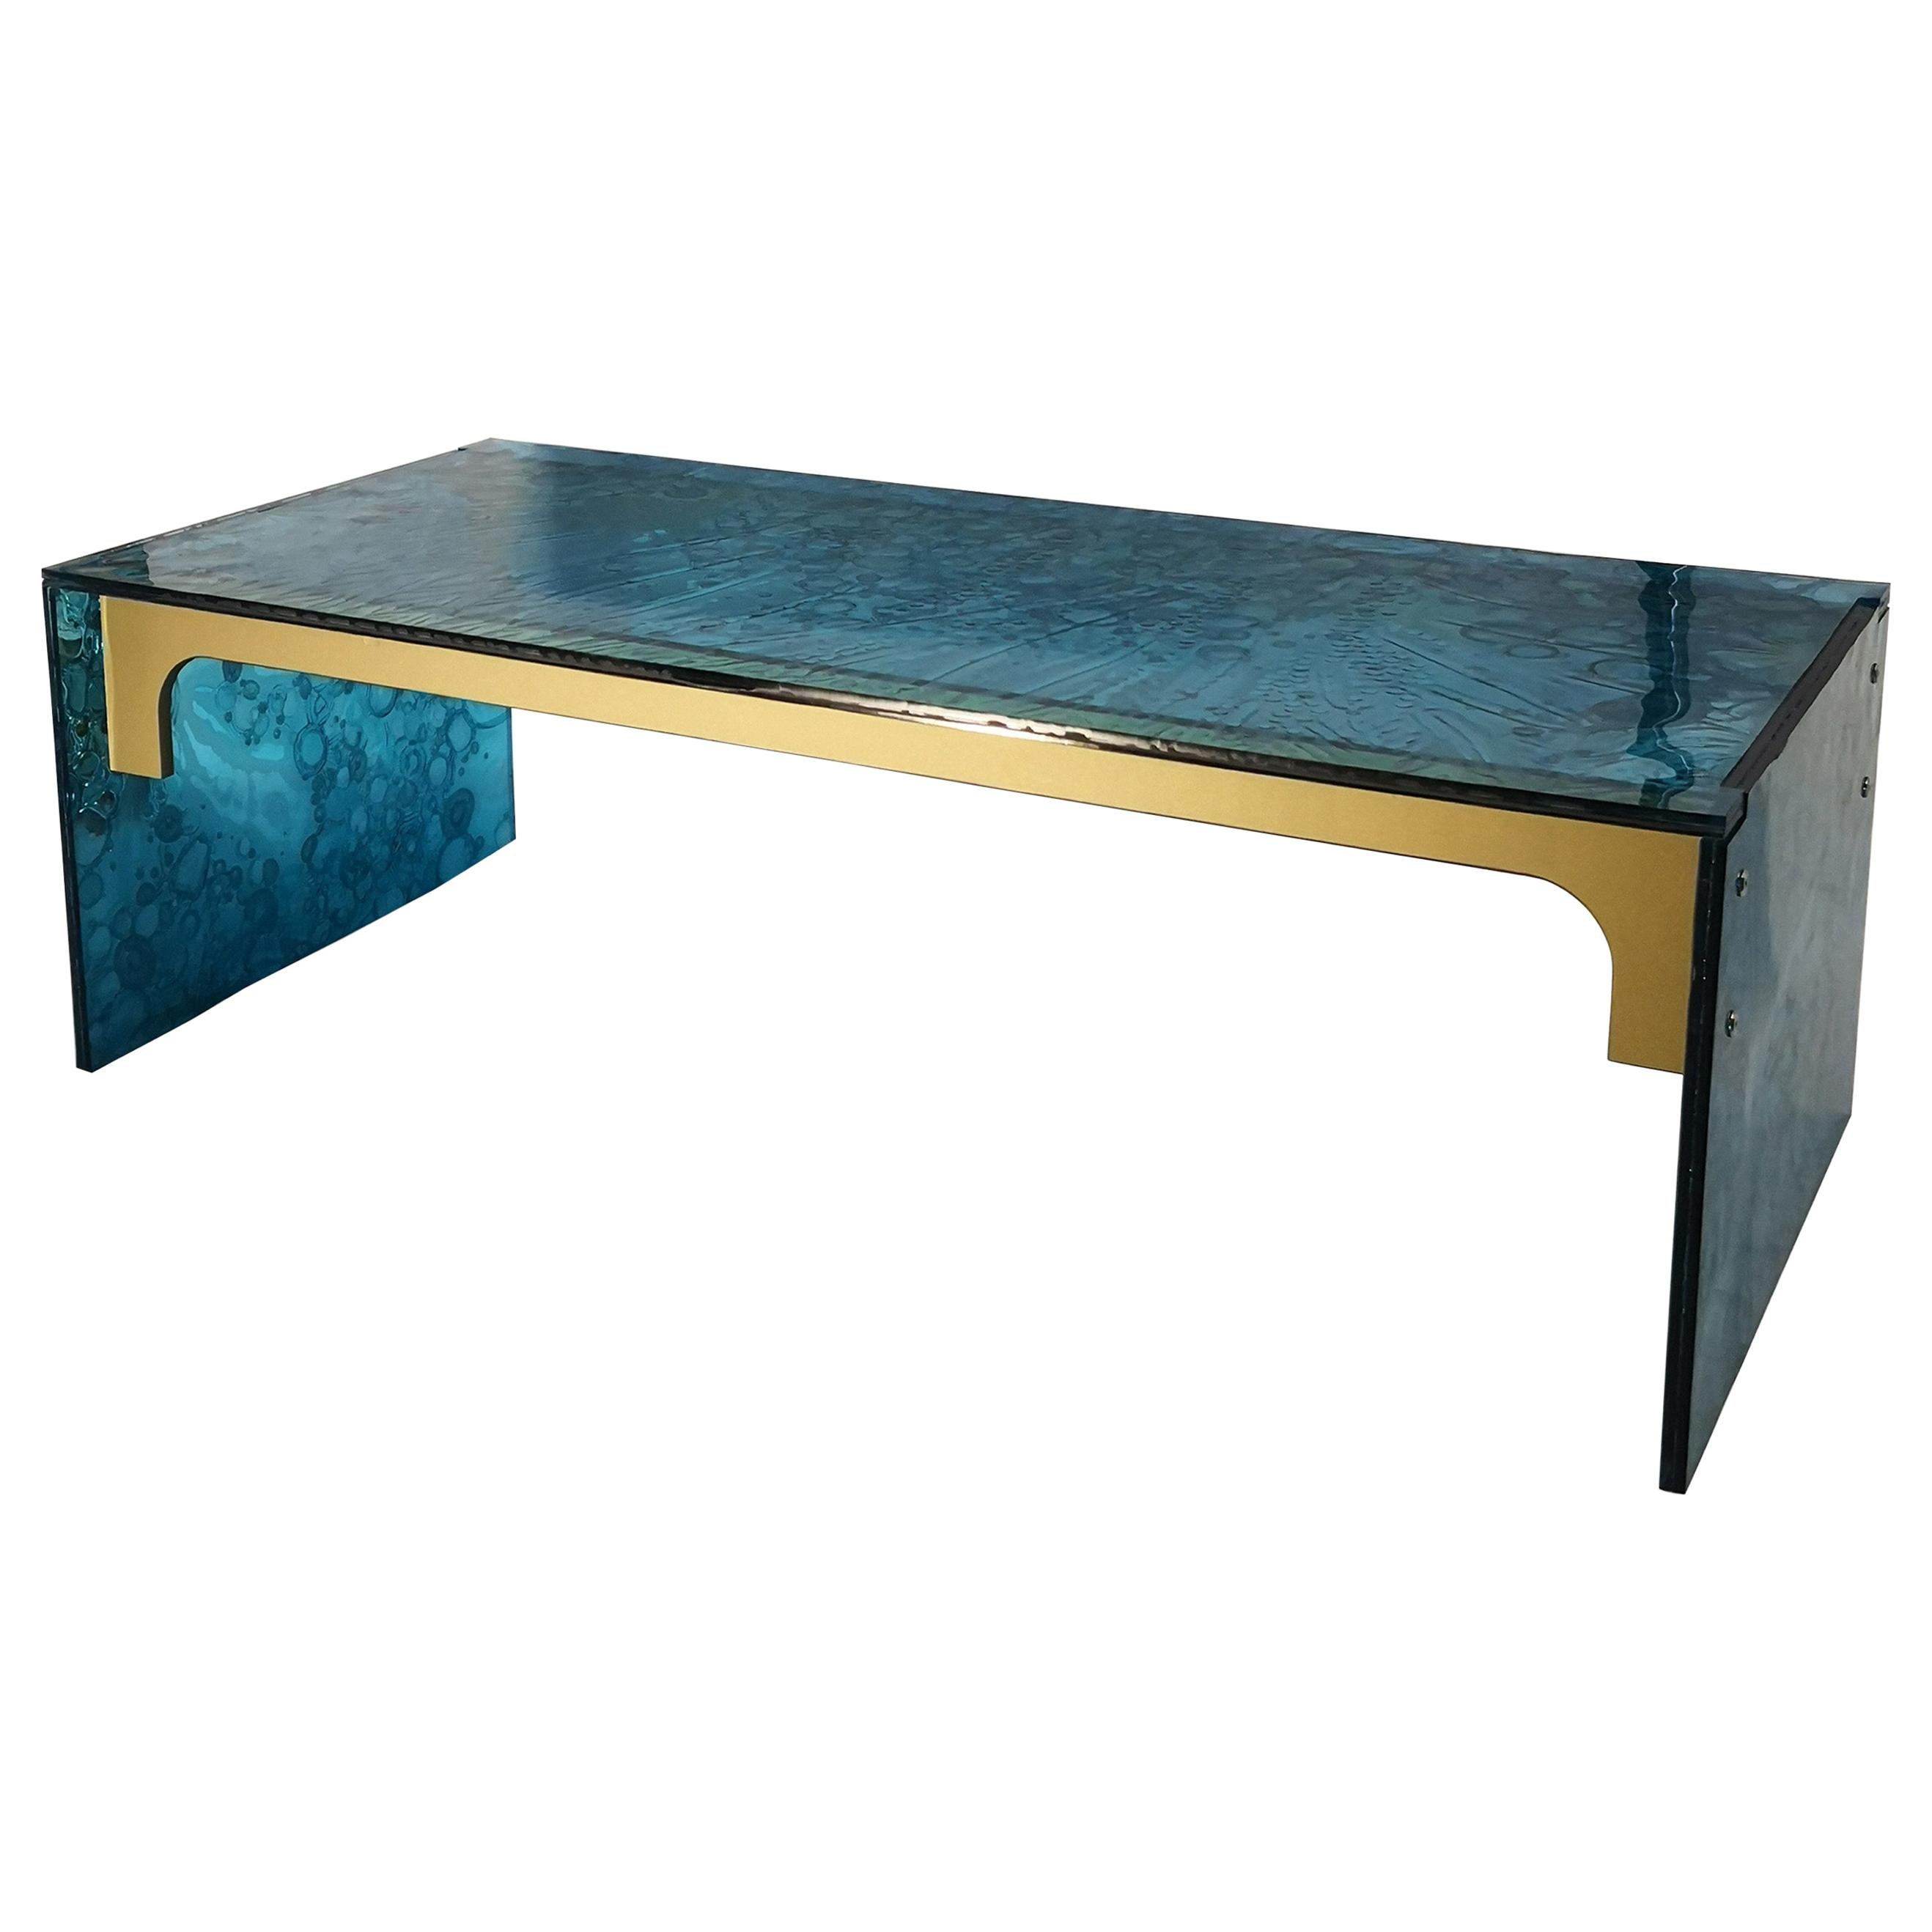 Sketch Quadro Coffee Table Made of Green Acrylic Des, Roberto Giacomucci in 2020